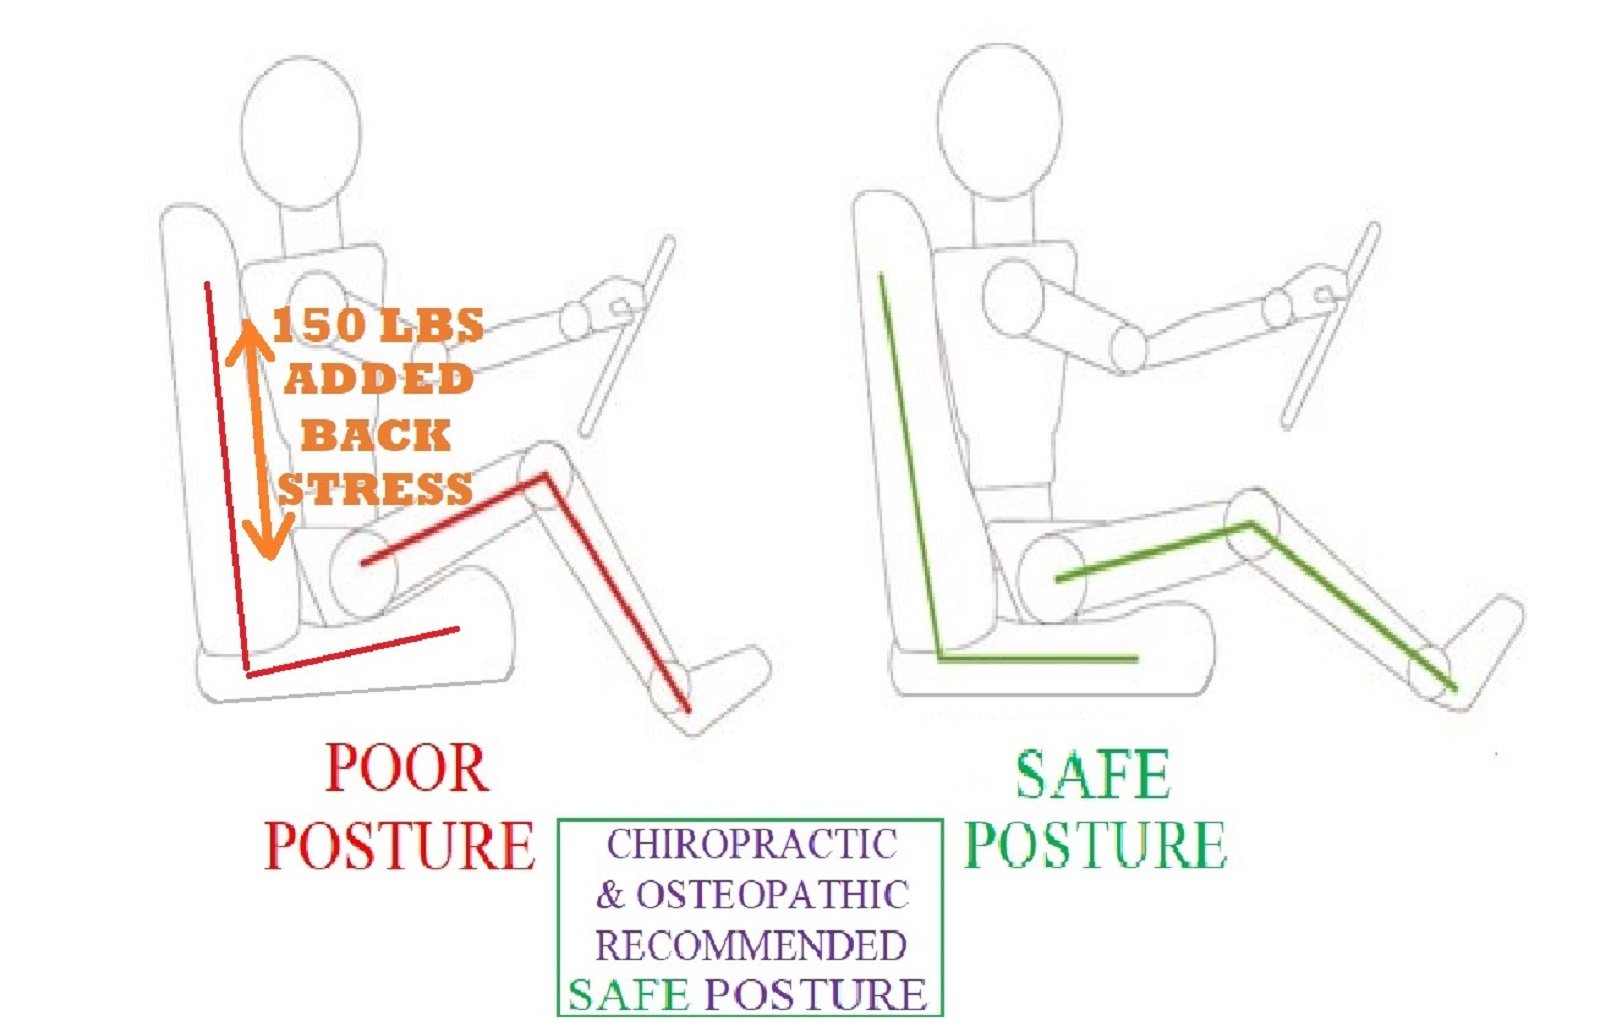 004 fb recommended seat posture a.jpg